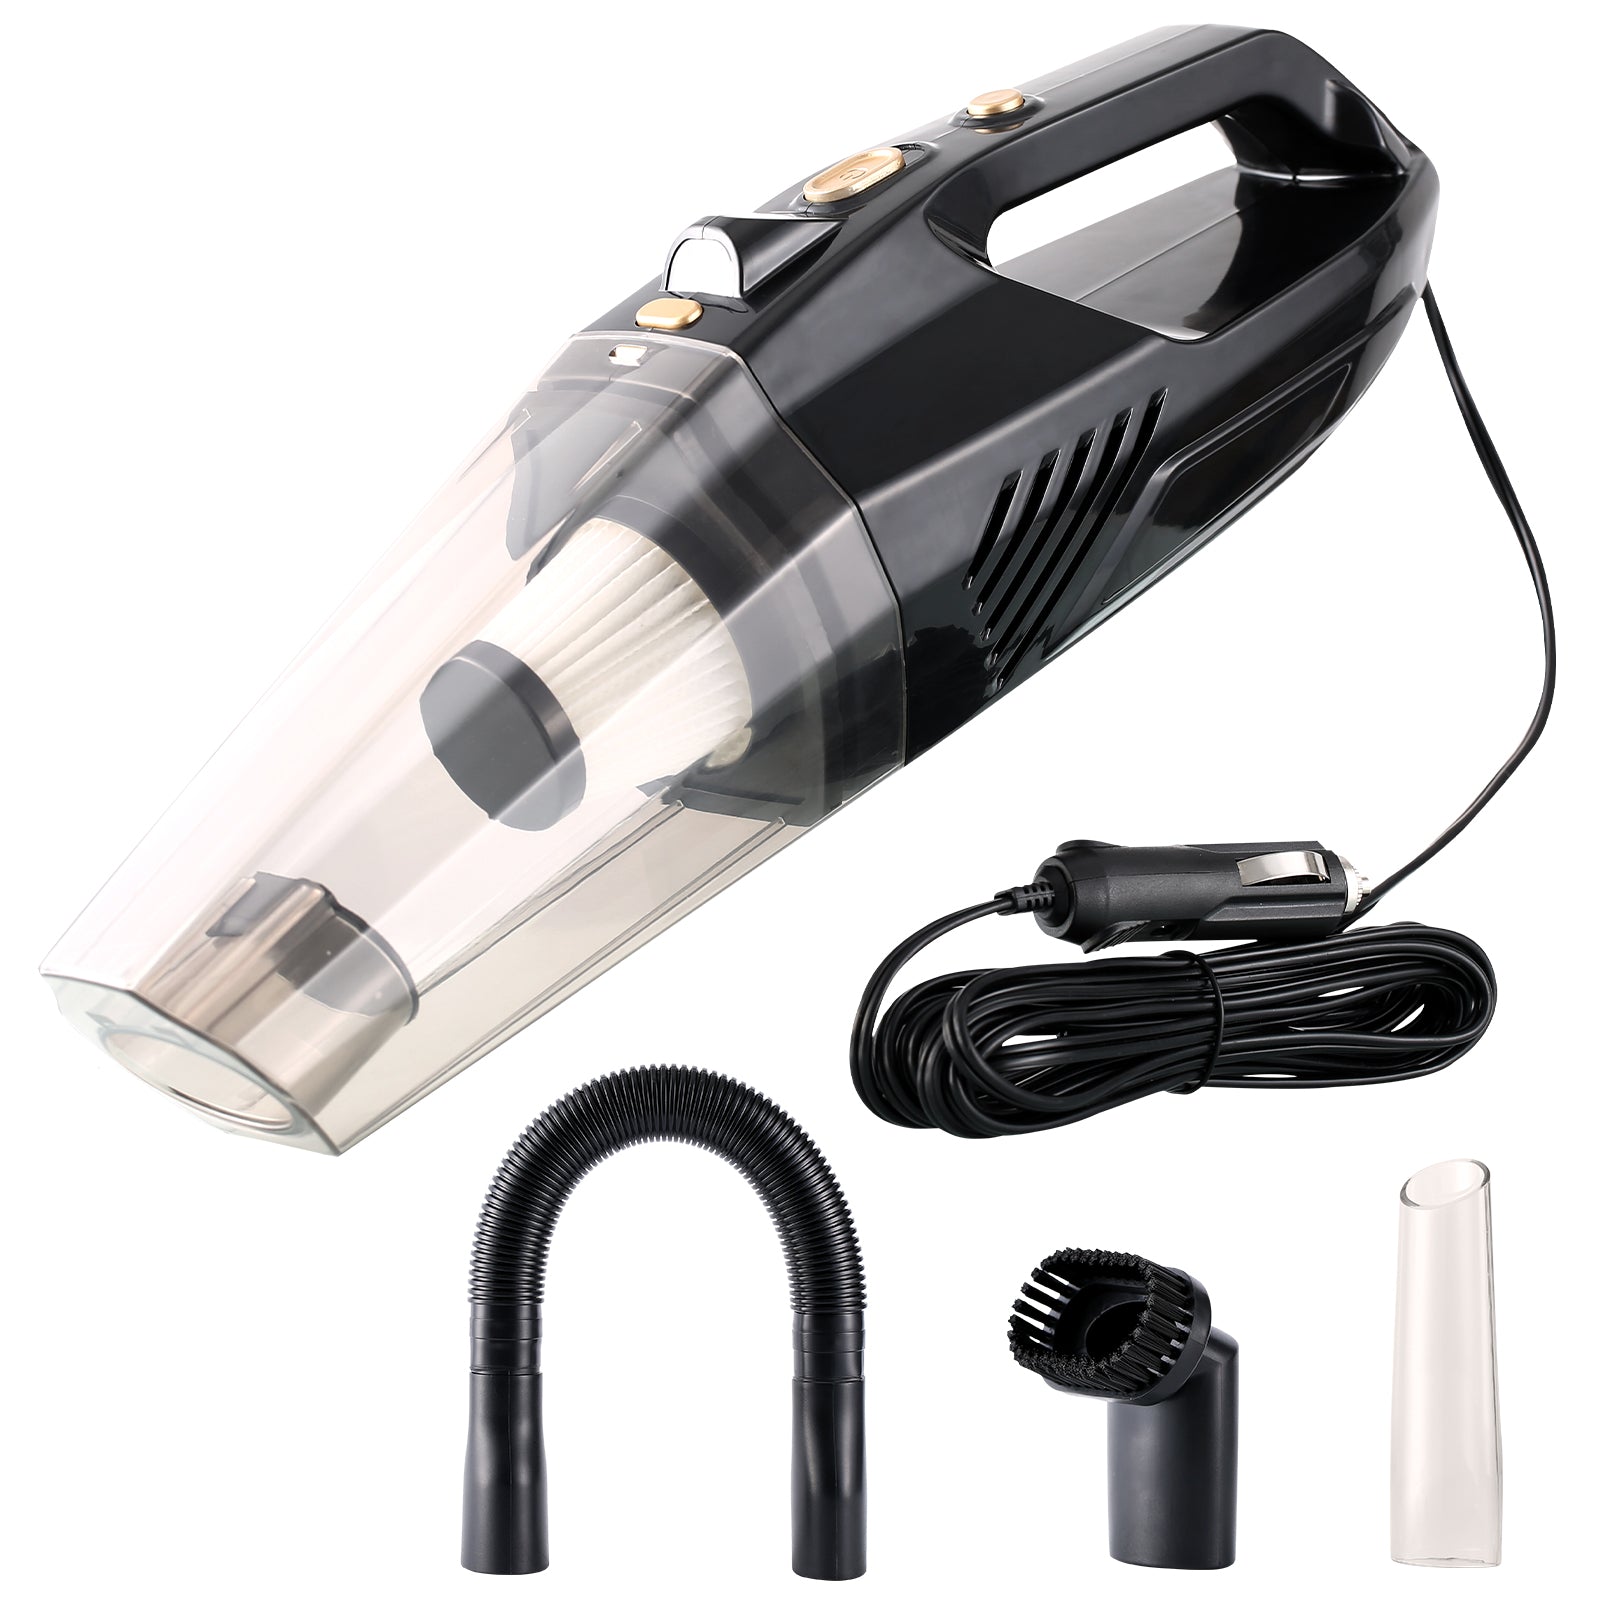 Car Vacuum Cleaner with LED Light, Double HEPA Filter, 110W High Suction  Power (Black) 